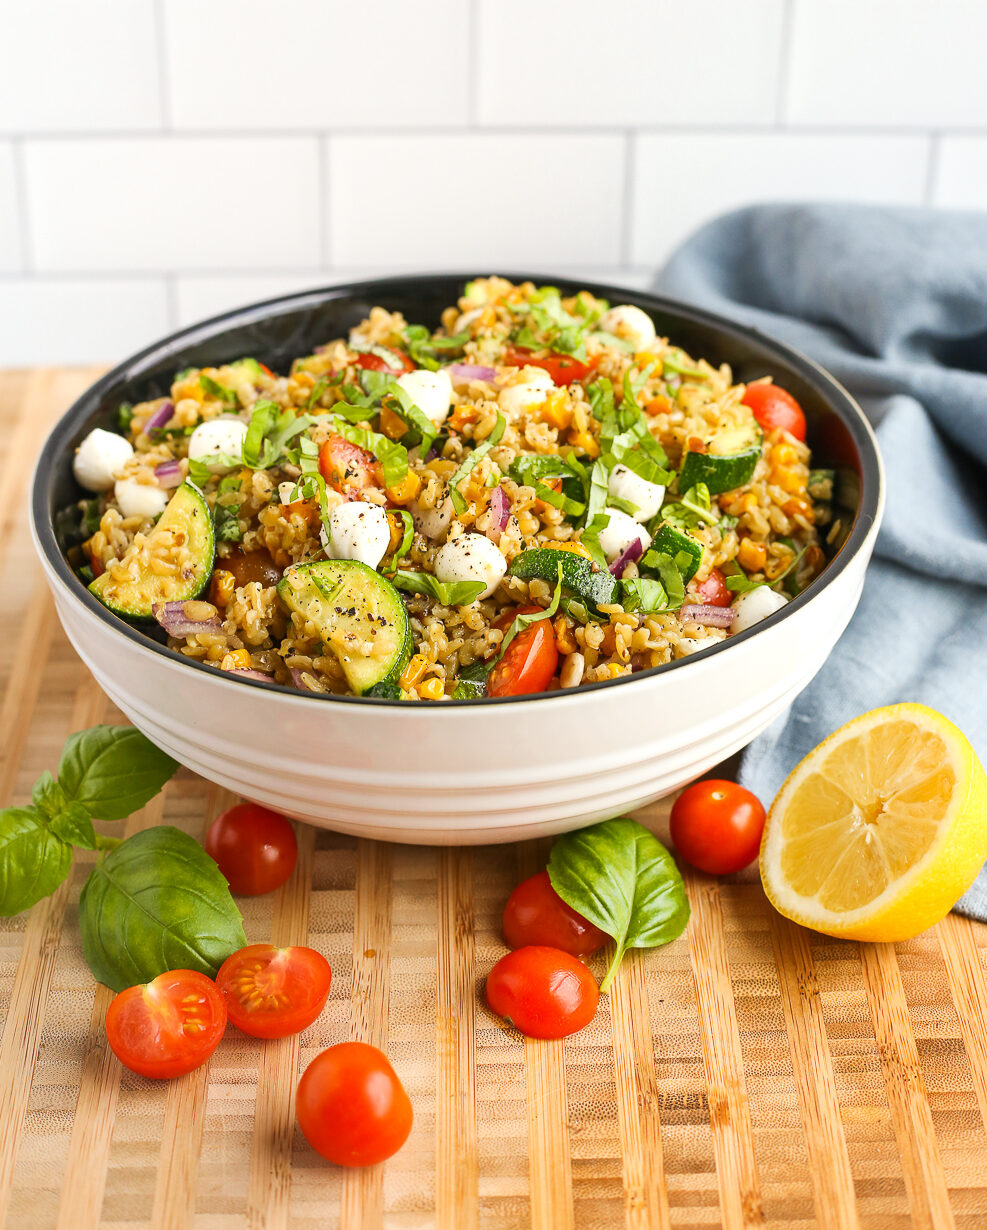 A large mixing bowl on a butcher block countertop filled with a freekeh salad made with cooked freekeh, sliced zucchini, cherry tomatoes, diced red onion, fresh basil, roasted sweet corn, and mozzarella